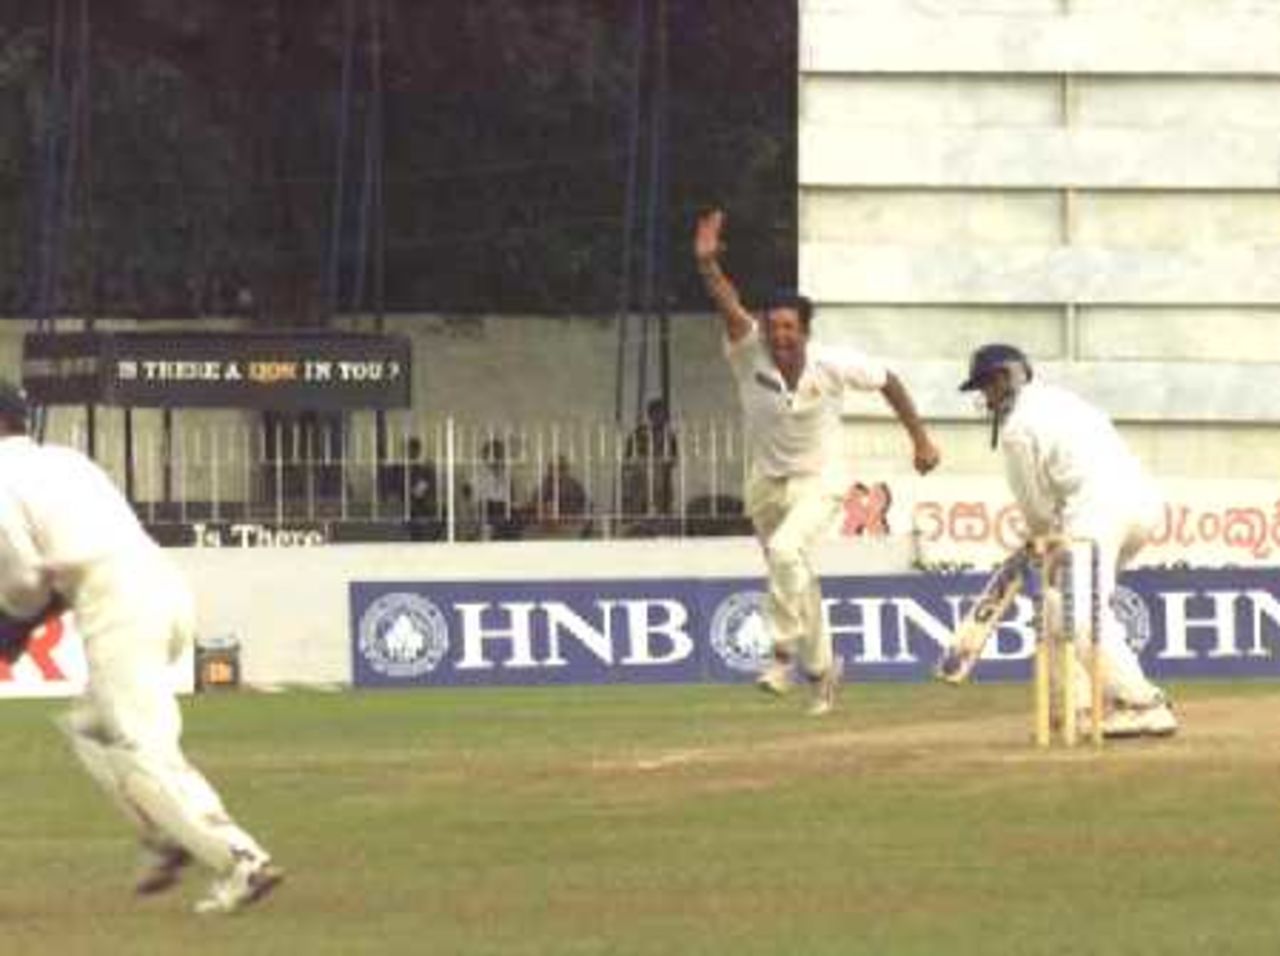 Wasim takes his 400th test wicket as Arnold looks at fielder, Colombo, Pakistan v Sri Lanka, 18-22 June 2000